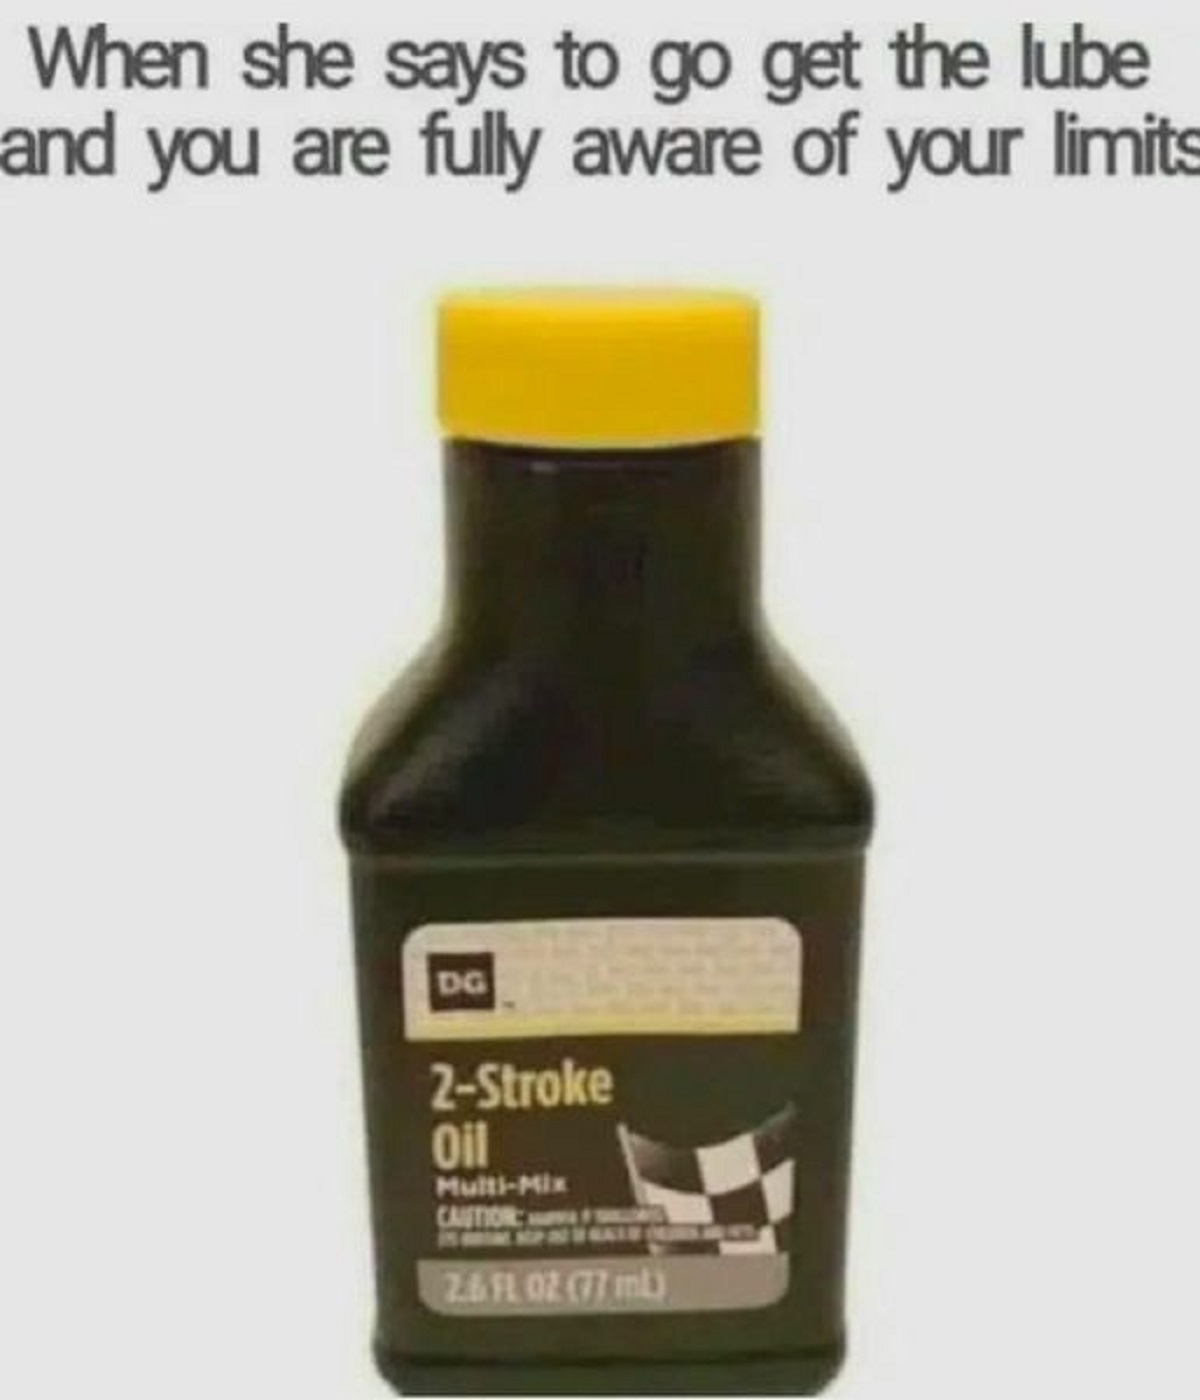 spicy memes - 2 stroke oil meme - When she says to go get the lube and you are fully aware of your limits Dg 2Stroke Oil MultiMix Caution 2.& Fl 02 77 ml